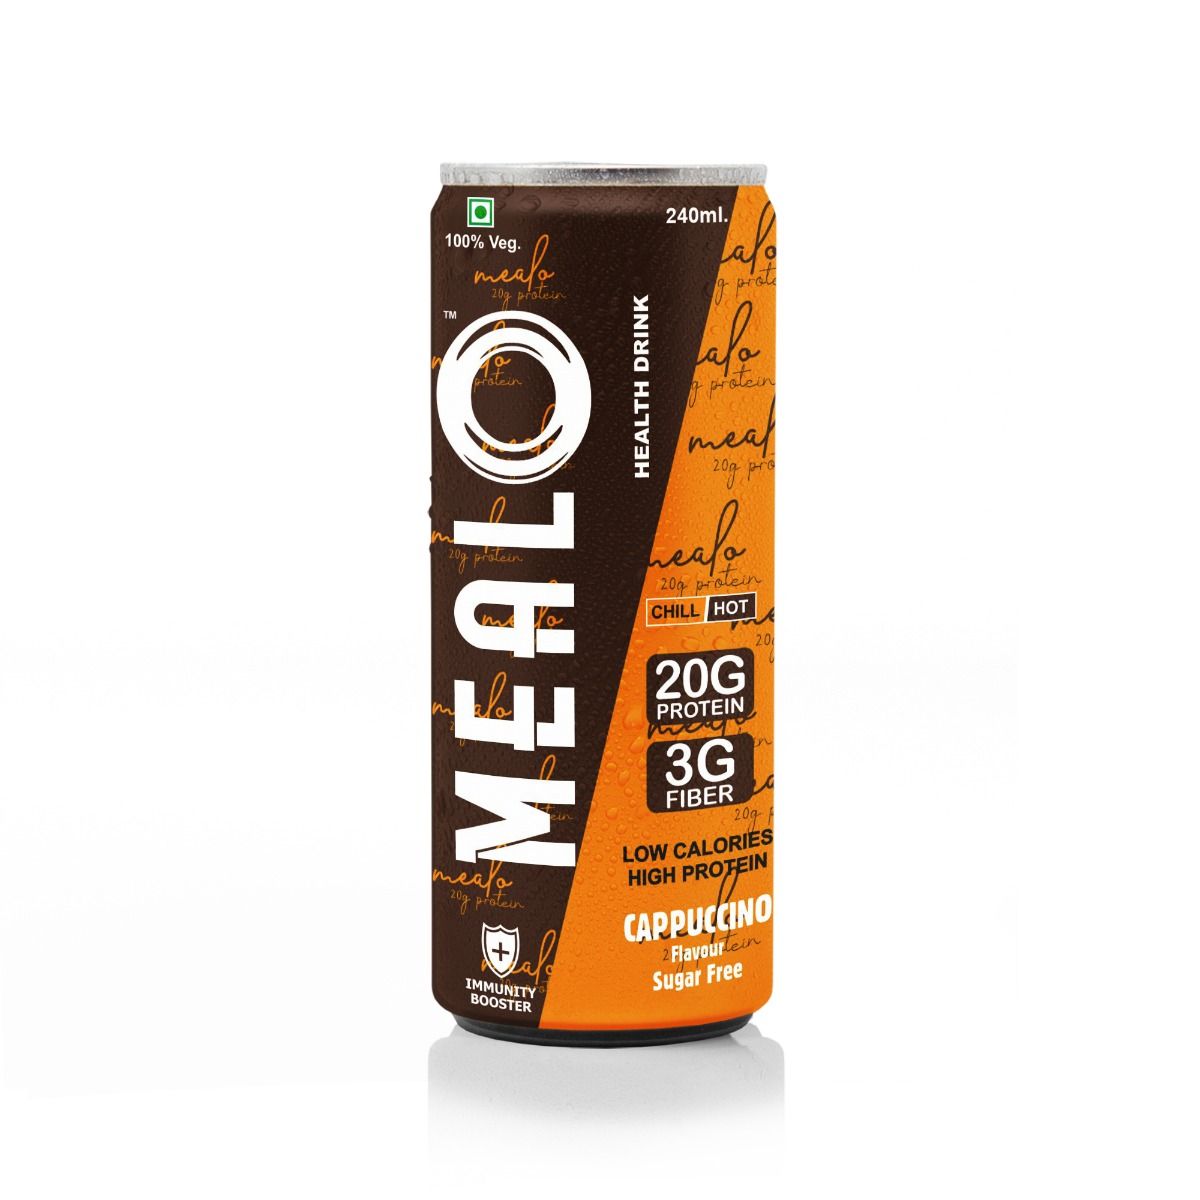 Buy Mealo Cappuccino Flavoured Sugar Free Health Drink, 240 ml Online